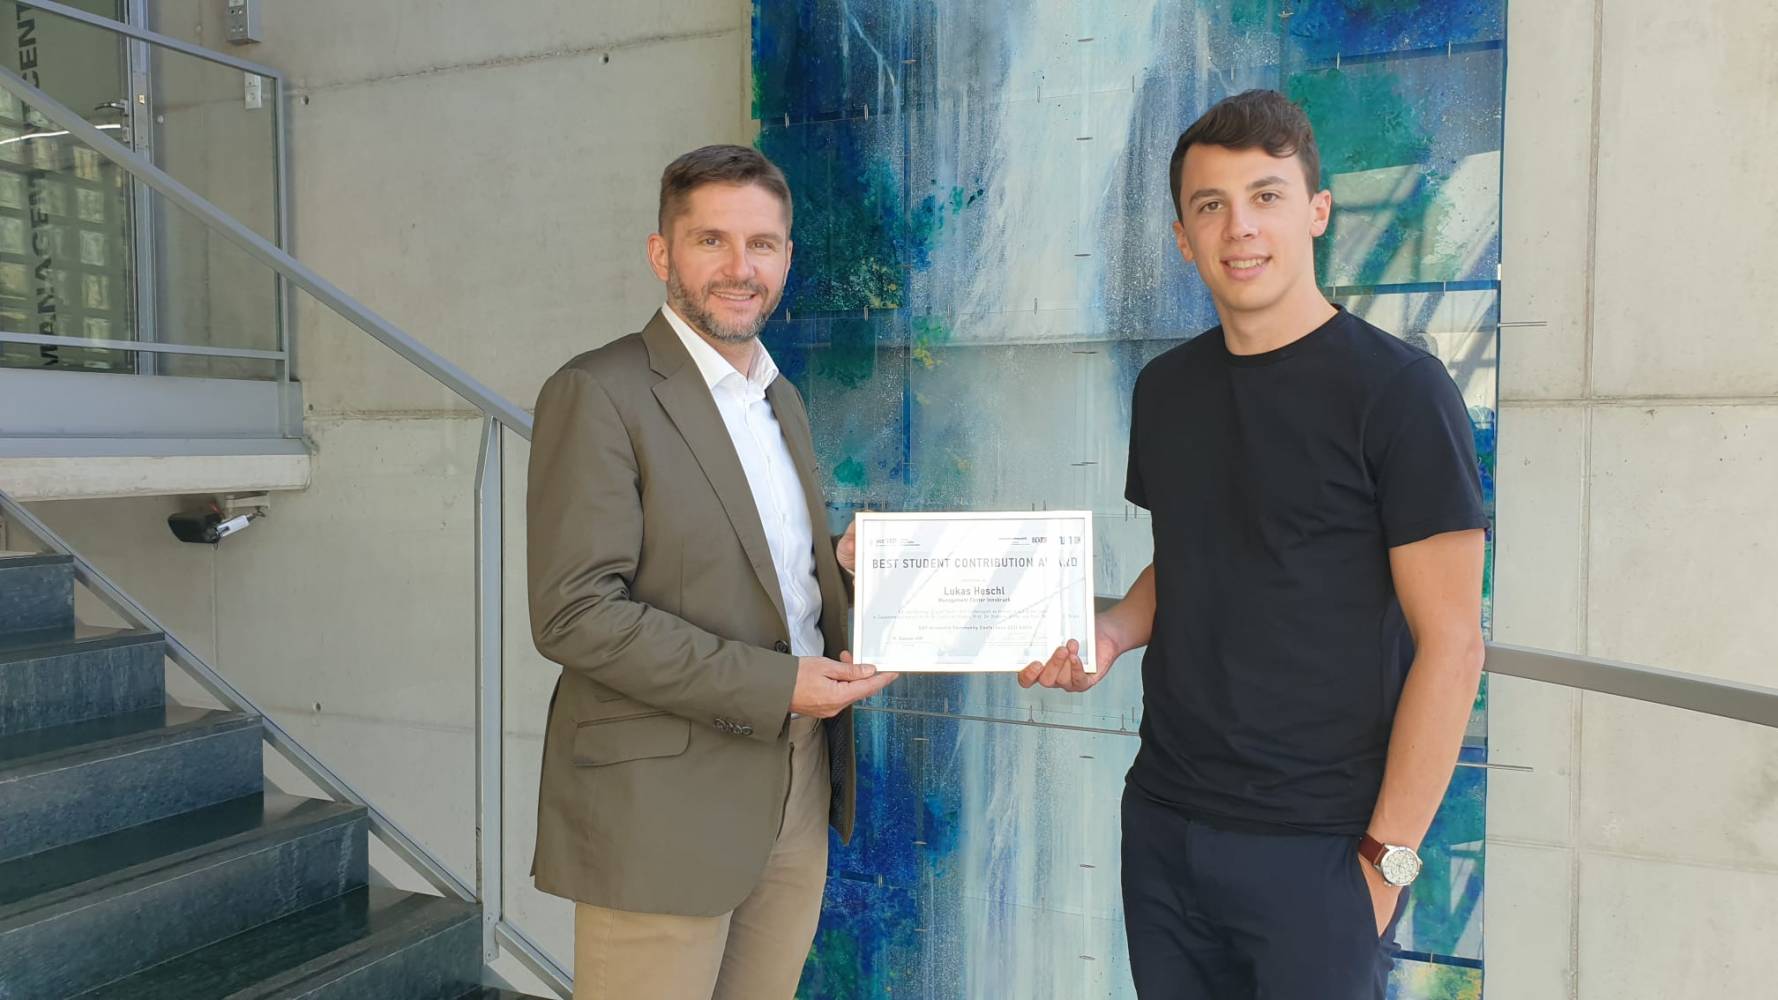 MCI project member and former Management, Communication & IT Master's student Lukas Heschl, MA, wins the Best Student Contribution Award at the SAP Academic Community Conference 2021 DACH with his contribution 